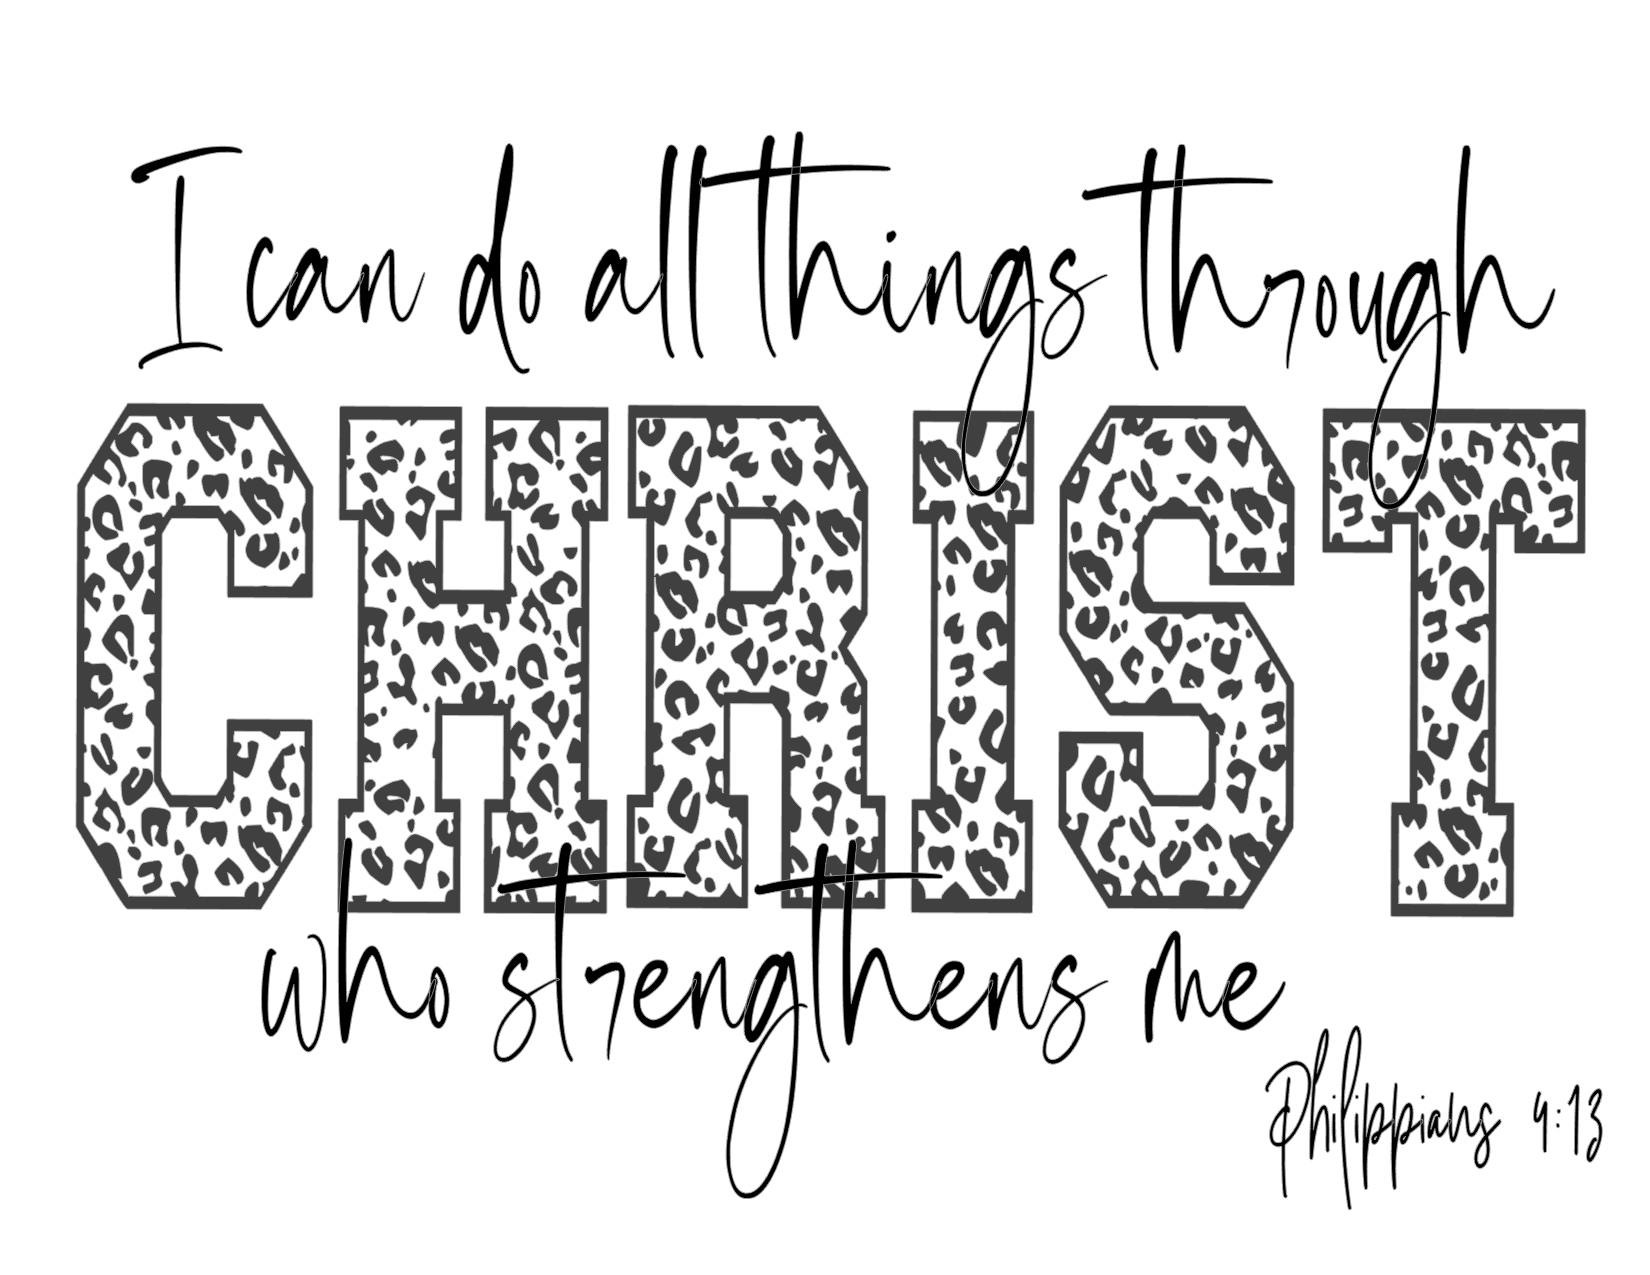 #141 I can do all things through CHRIST who strengthens me Philippians 4:13